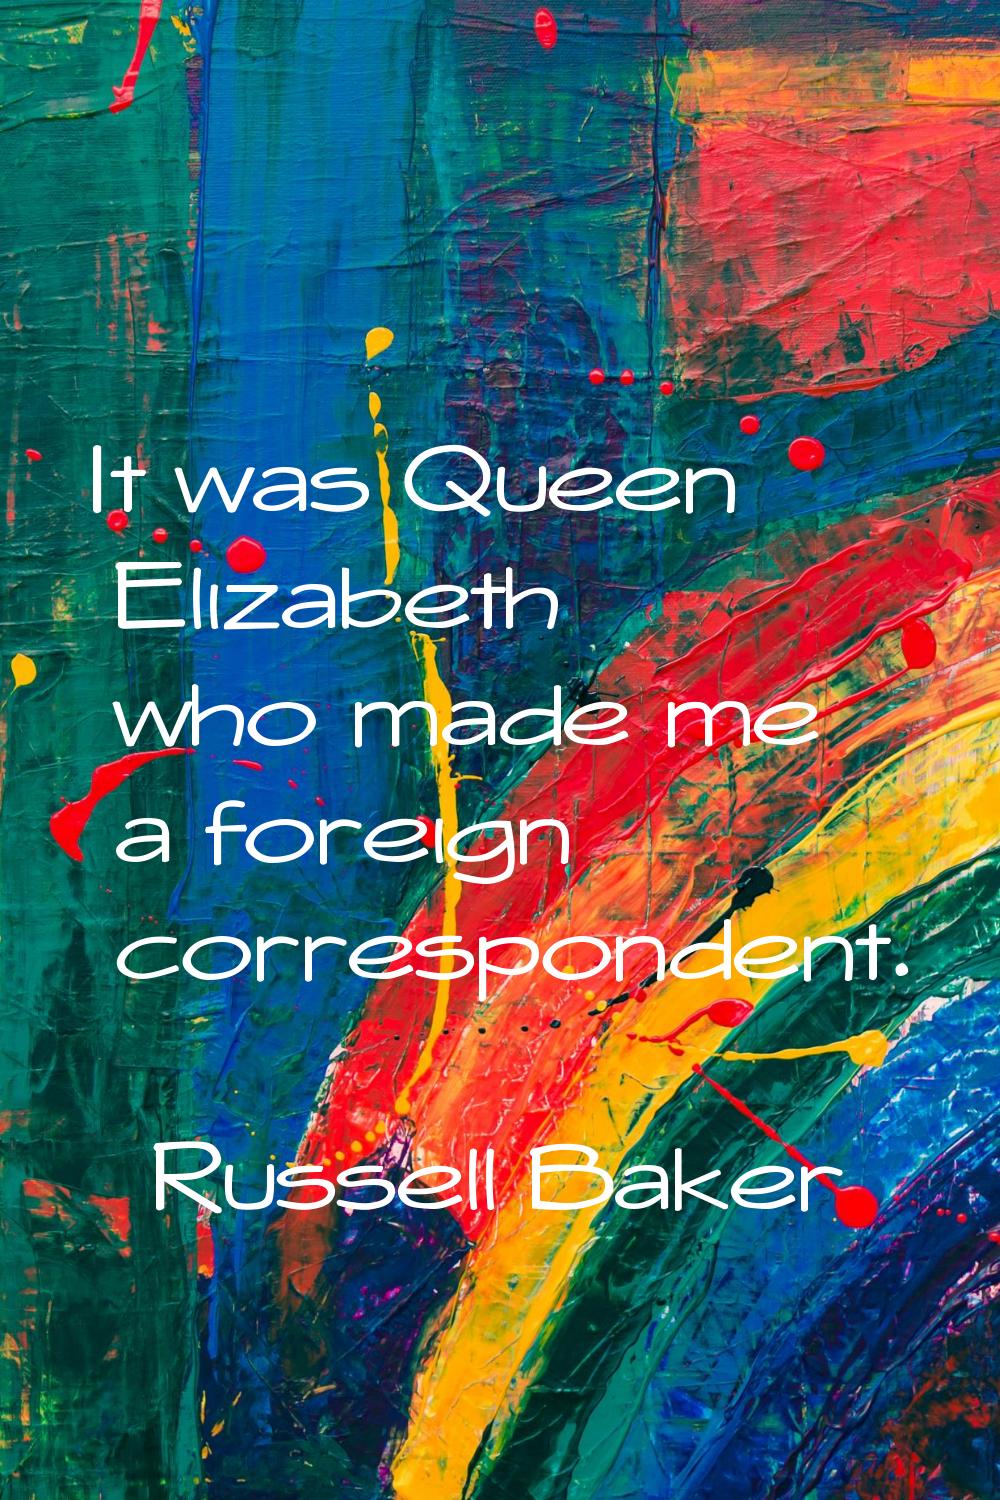 It was Queen Elizabeth who made me a foreign correspondent.